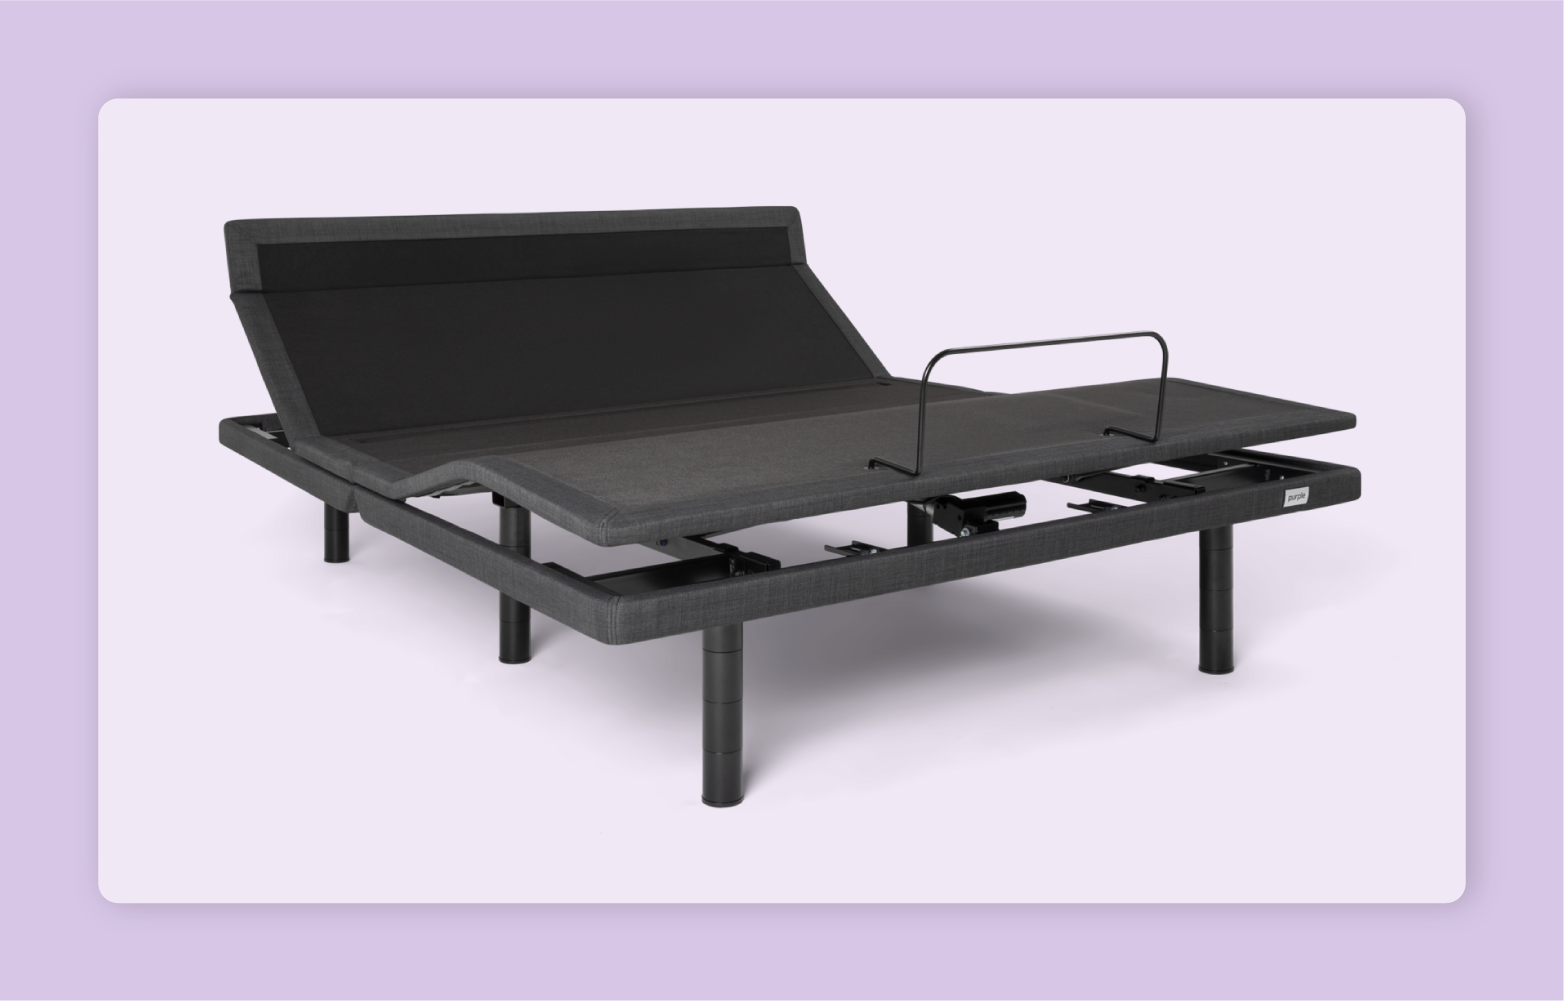 The charcoal gray Purple Premium Plus Smart Base in an inclined position before a light purple background.